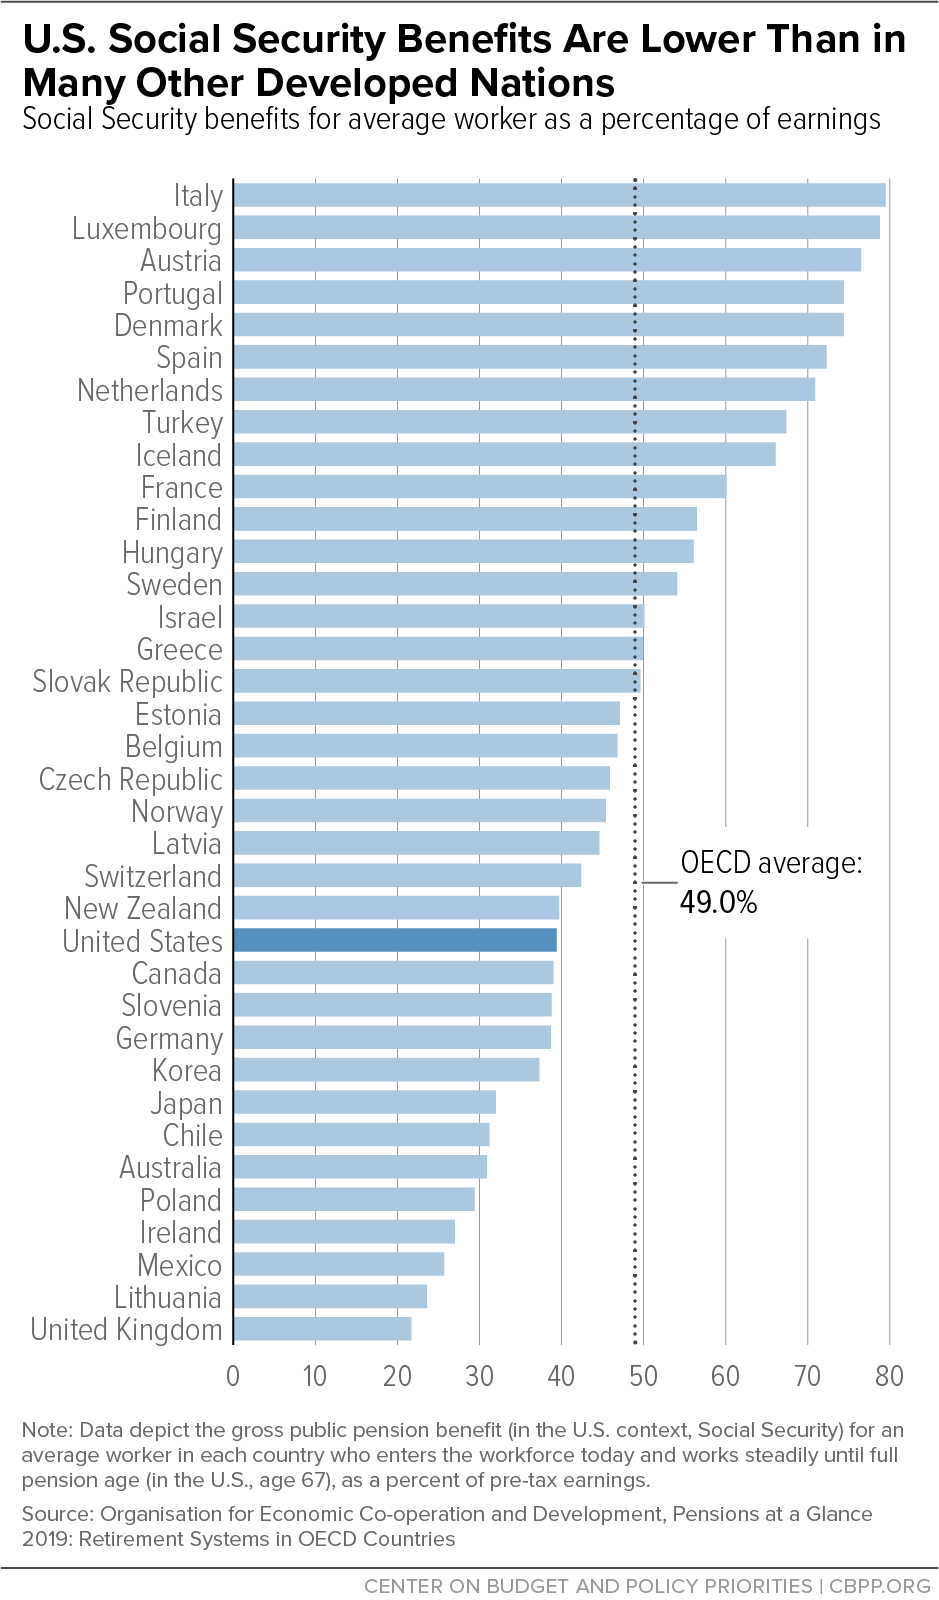 U.S. Social Security Benefits Are Lower Than in Many Other Developed Nations